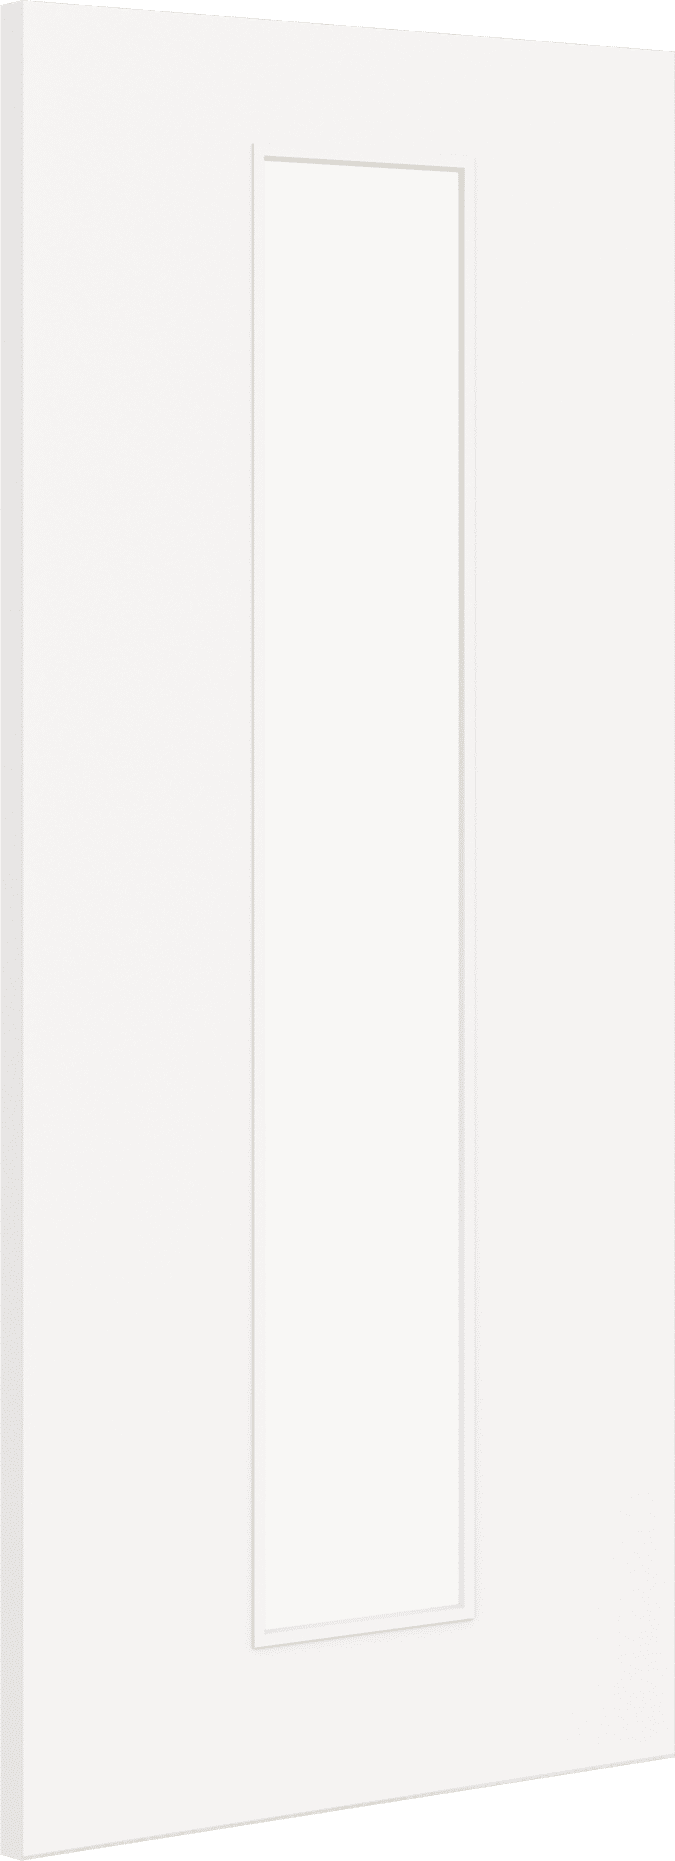 2040mm x 826mm x 44mm Architectural Paint Grade White 10 Frosted  Glazed Fire Door Blank